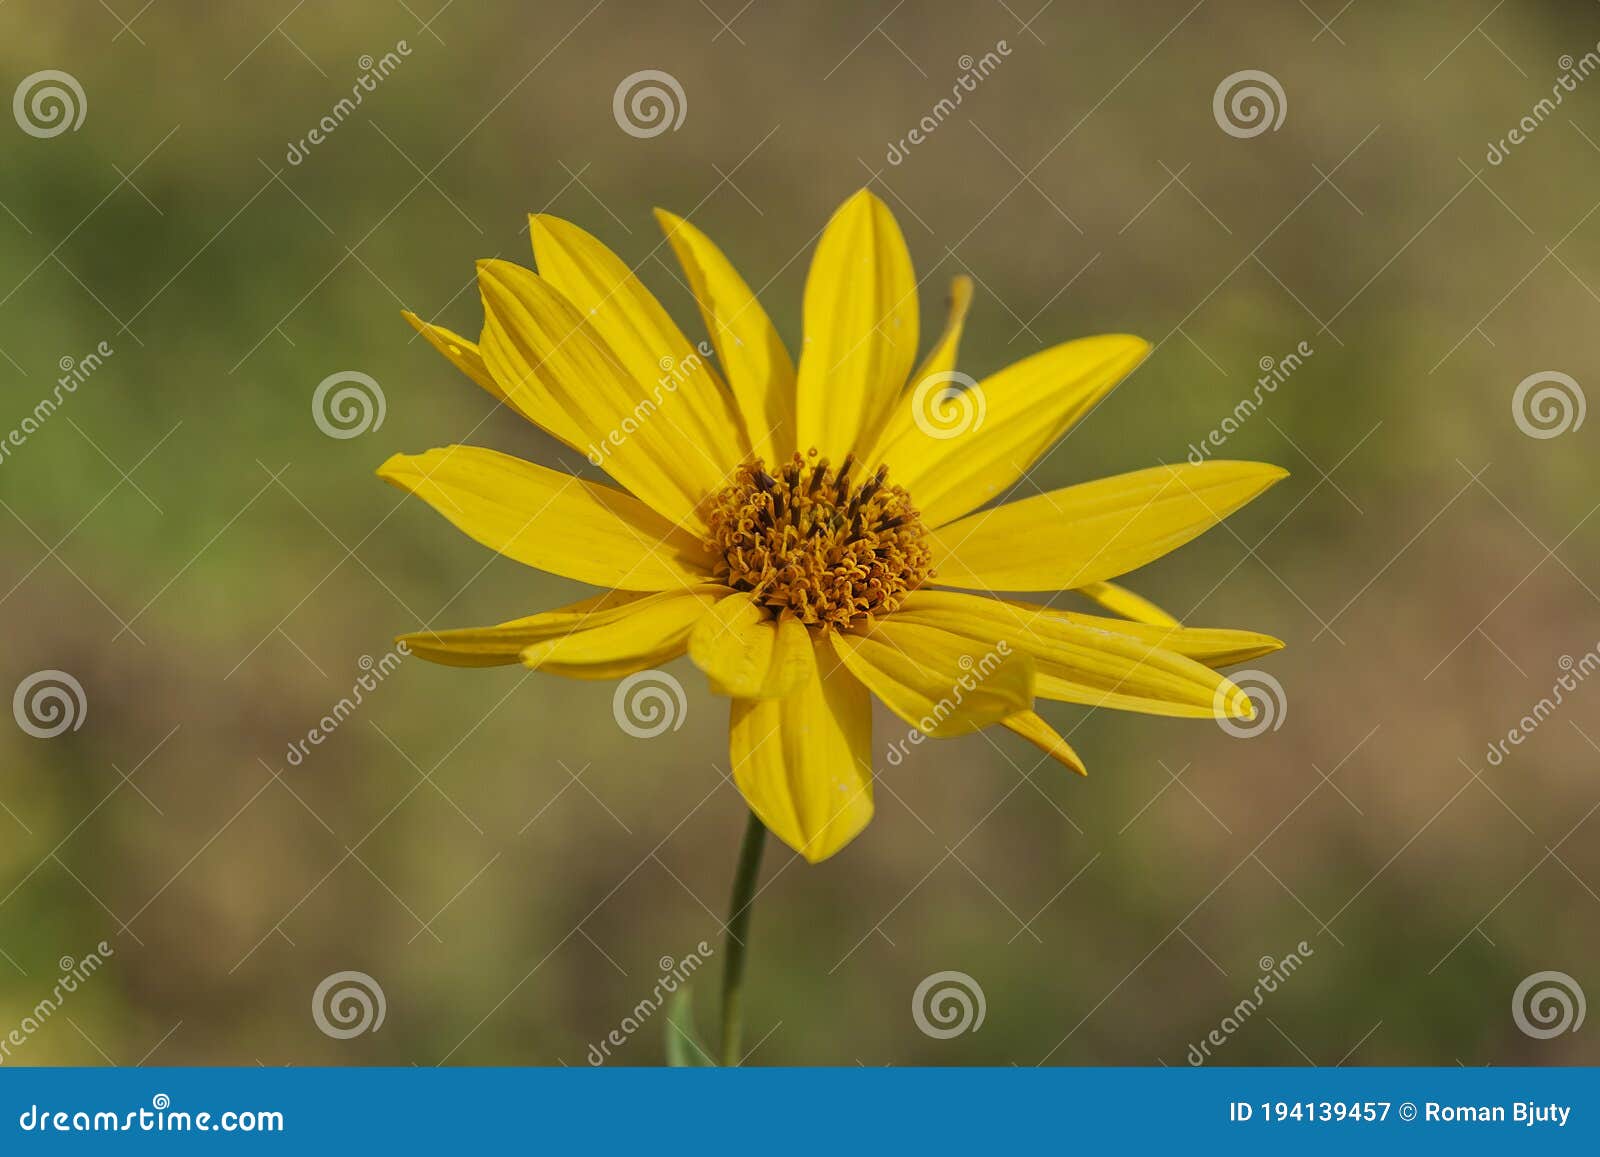 a bunch of yellow flowers that pollinate a bee